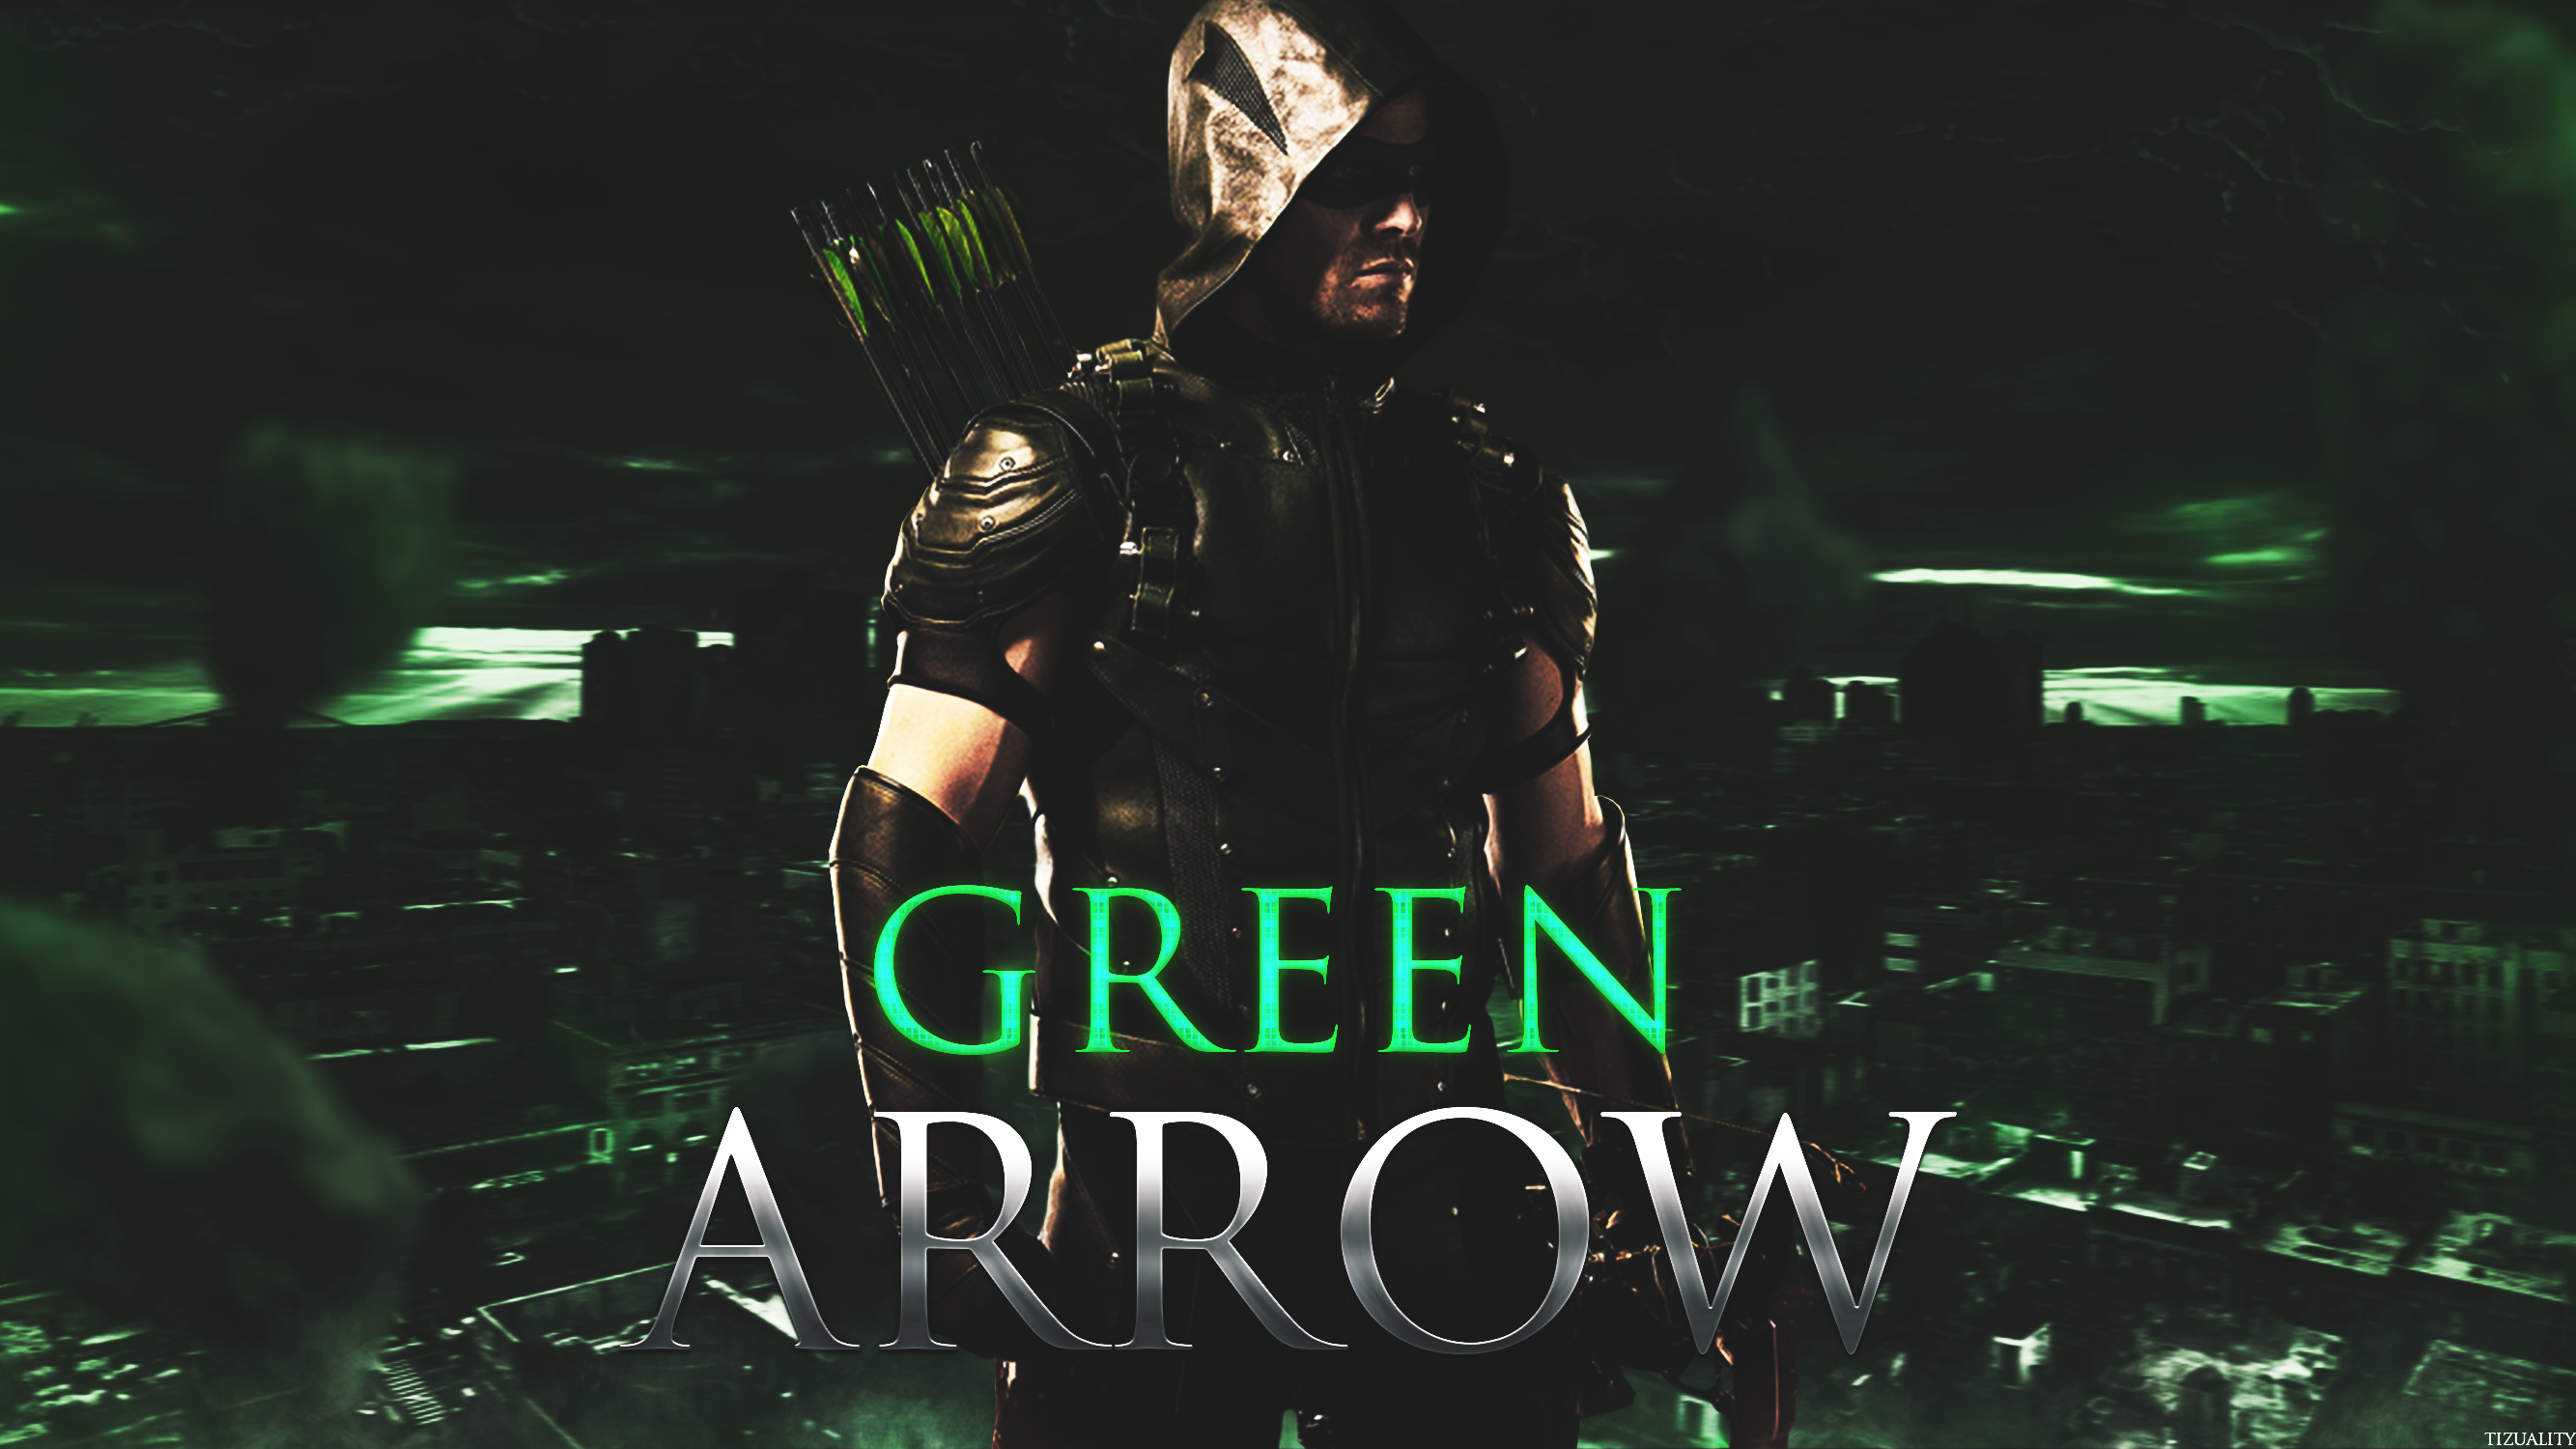 Fan Art My Green Arrow wallpaper which i made a while ago Hope